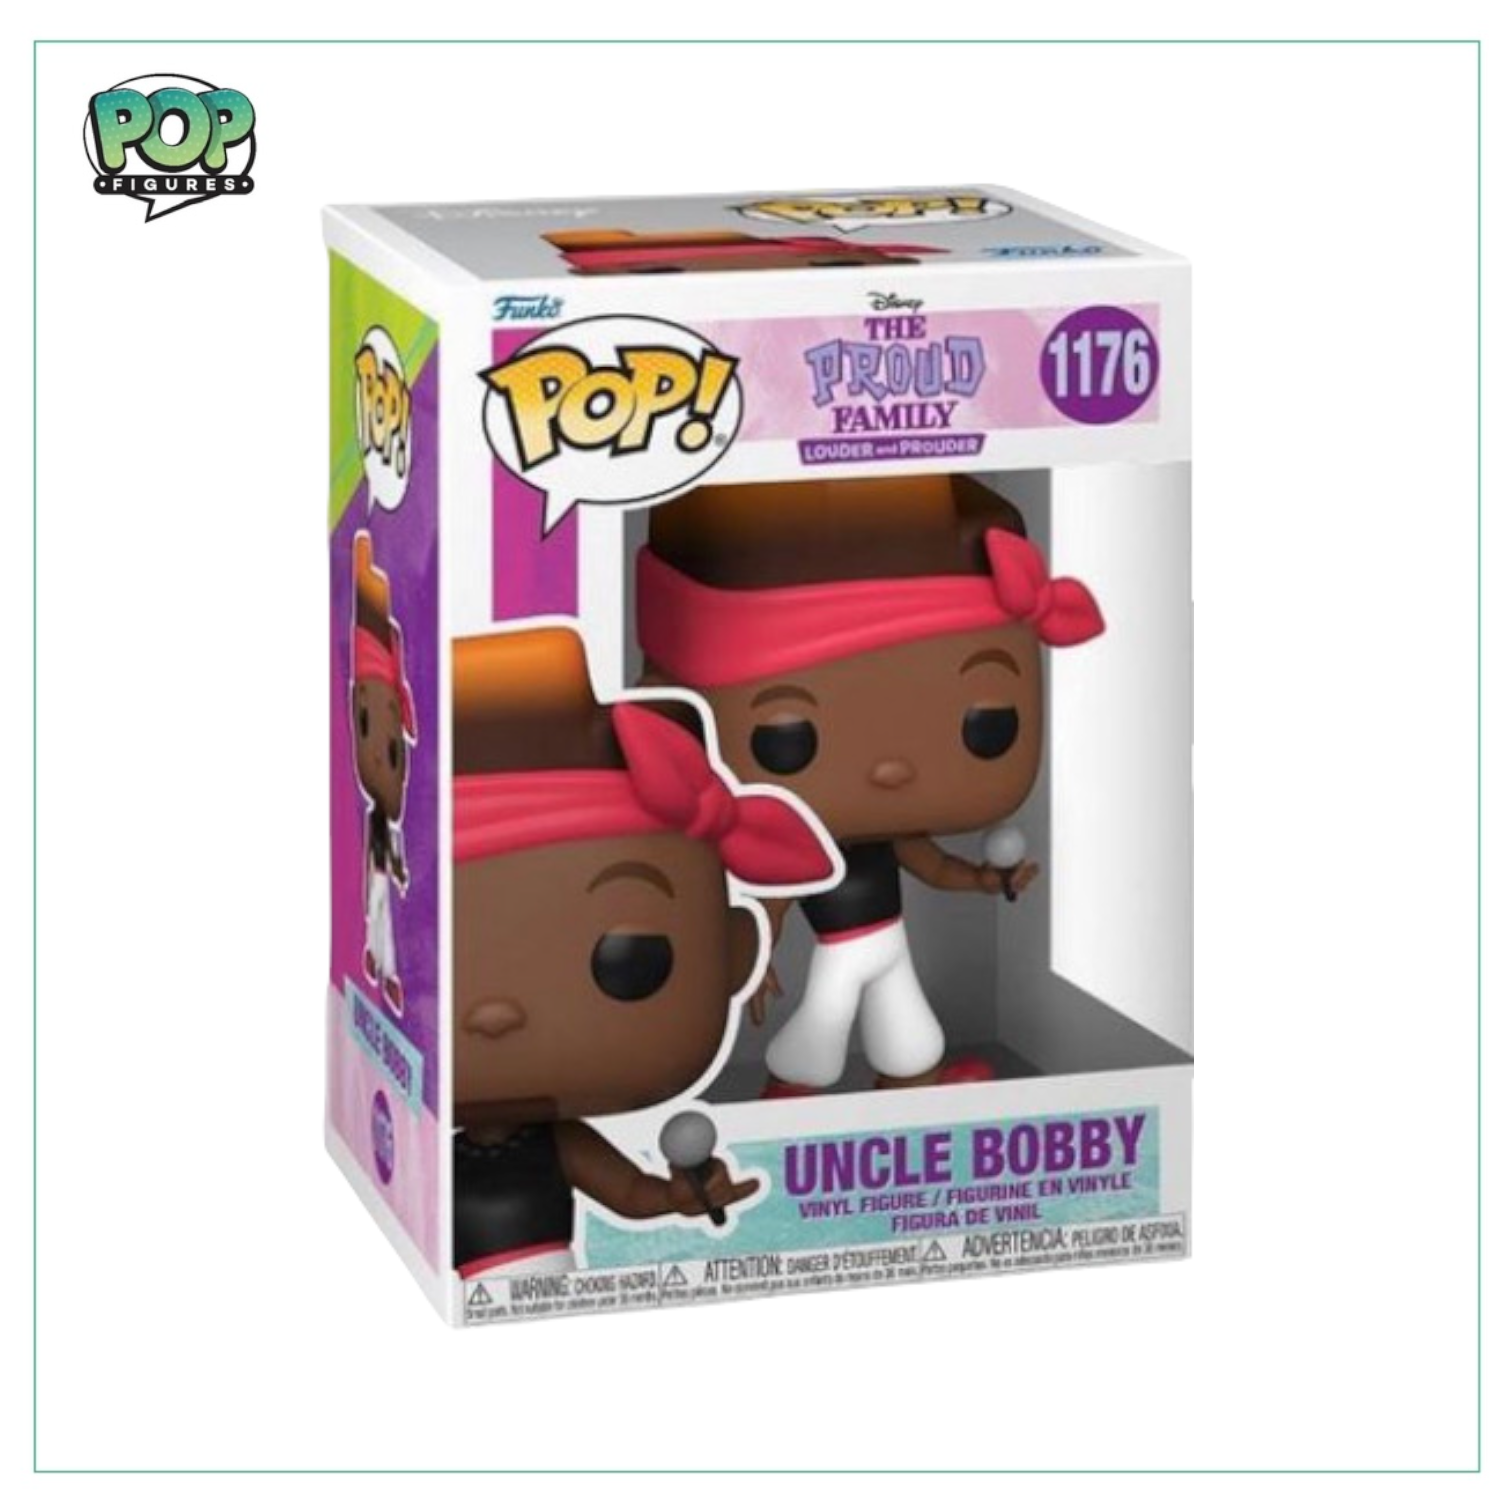 Uncle Bobby #1176 Funko Pop! The Proud Family